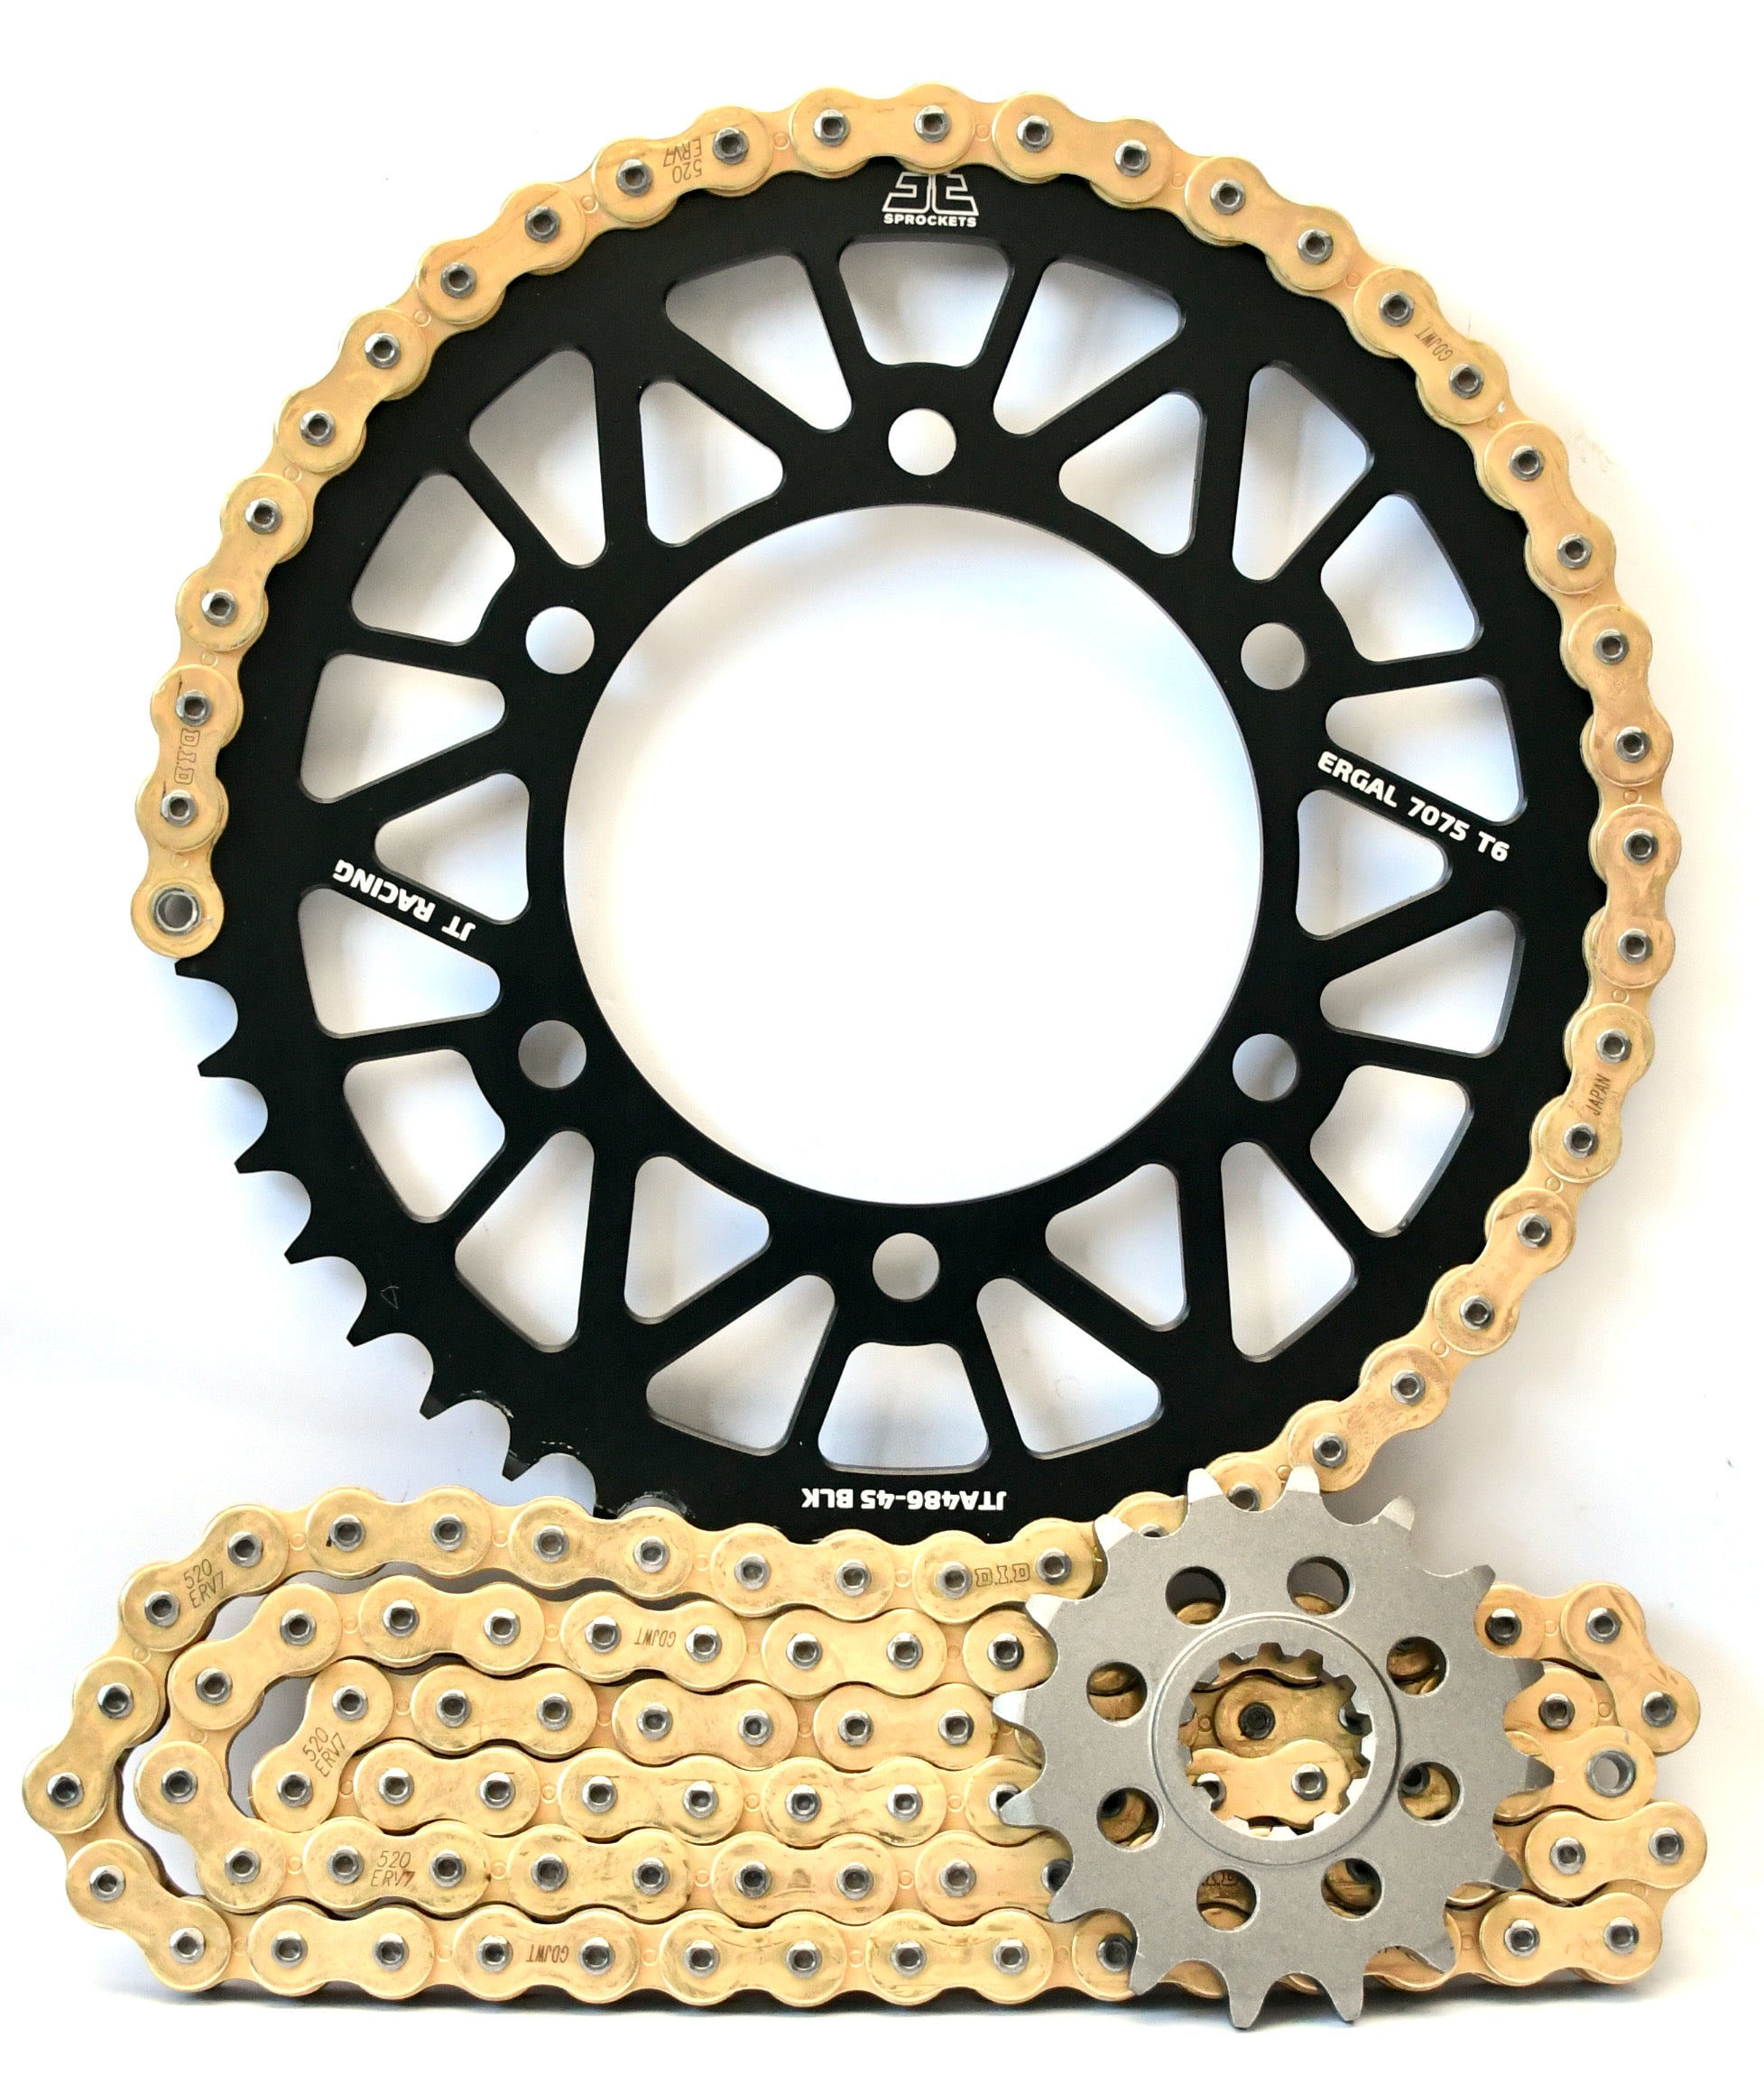 JT Racelite and DID 520 Conversion Chain & Sprocket Kit for Kawasaki ZX-10R - Choose Your Gearing